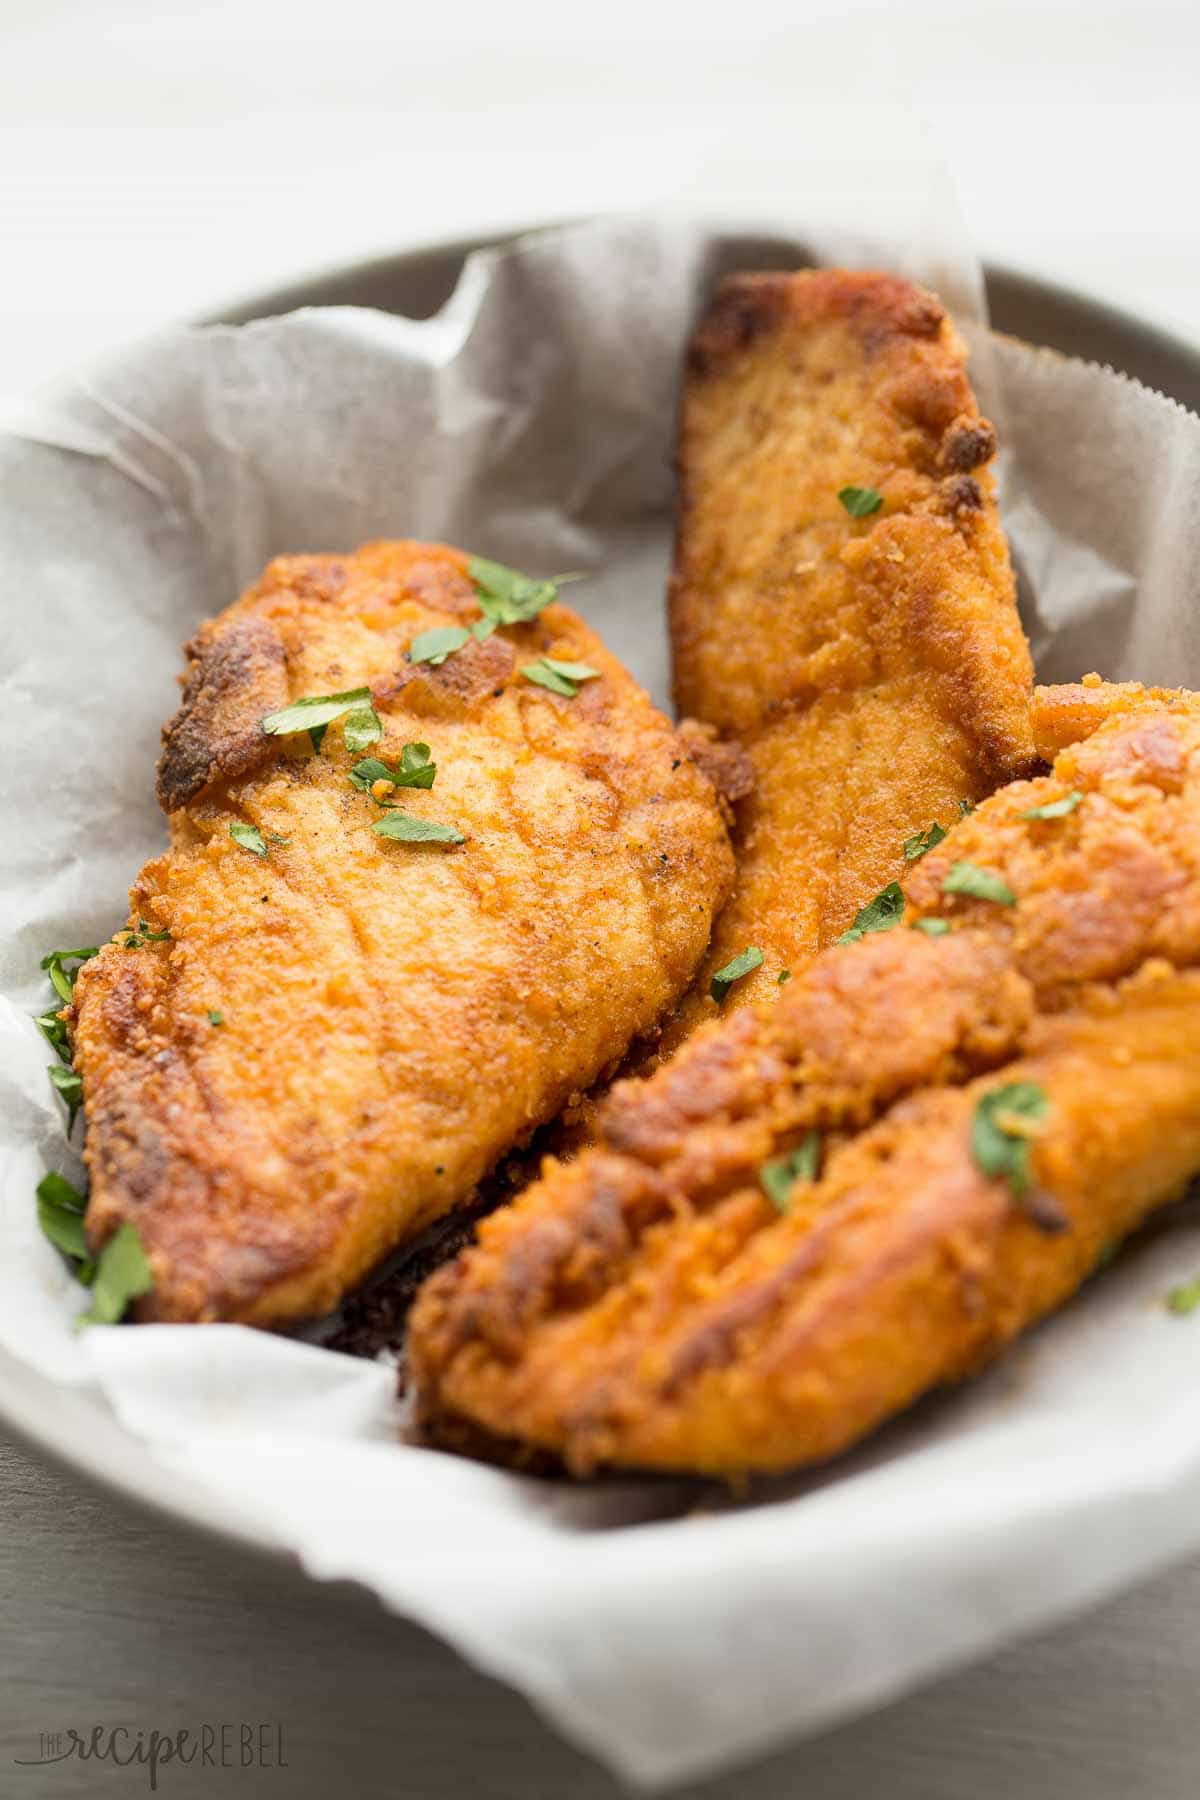 Crispy Oven Fried Chicken Recipe
 The BEST Oven Fried Chicken Recipe Baked Fried Chicken